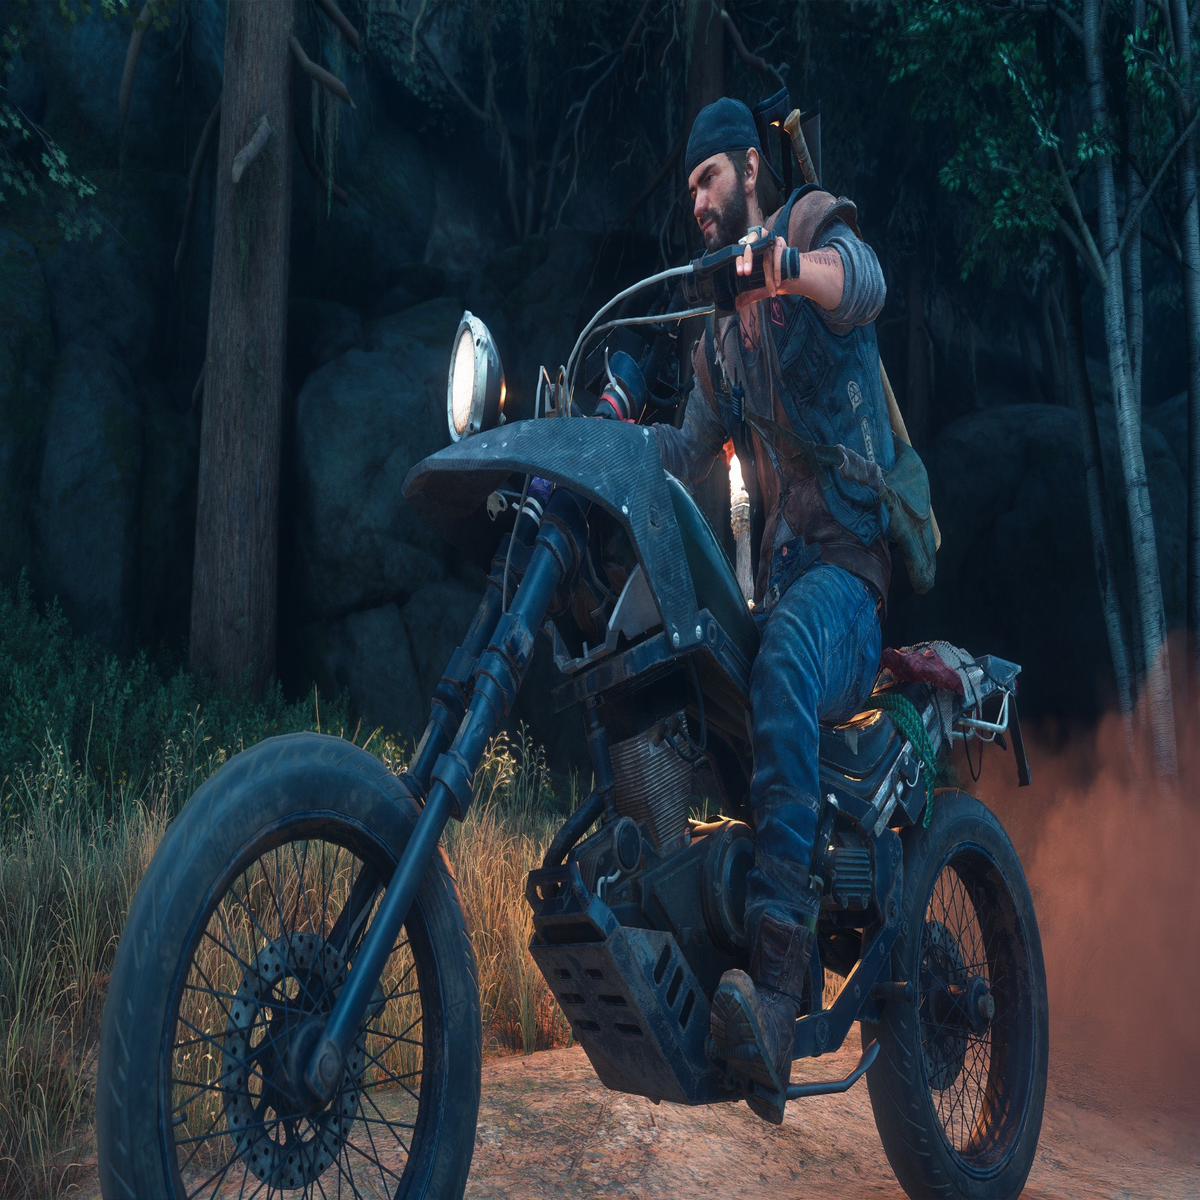 Here are 28 minutes of PC gameplay footage from Days Gone